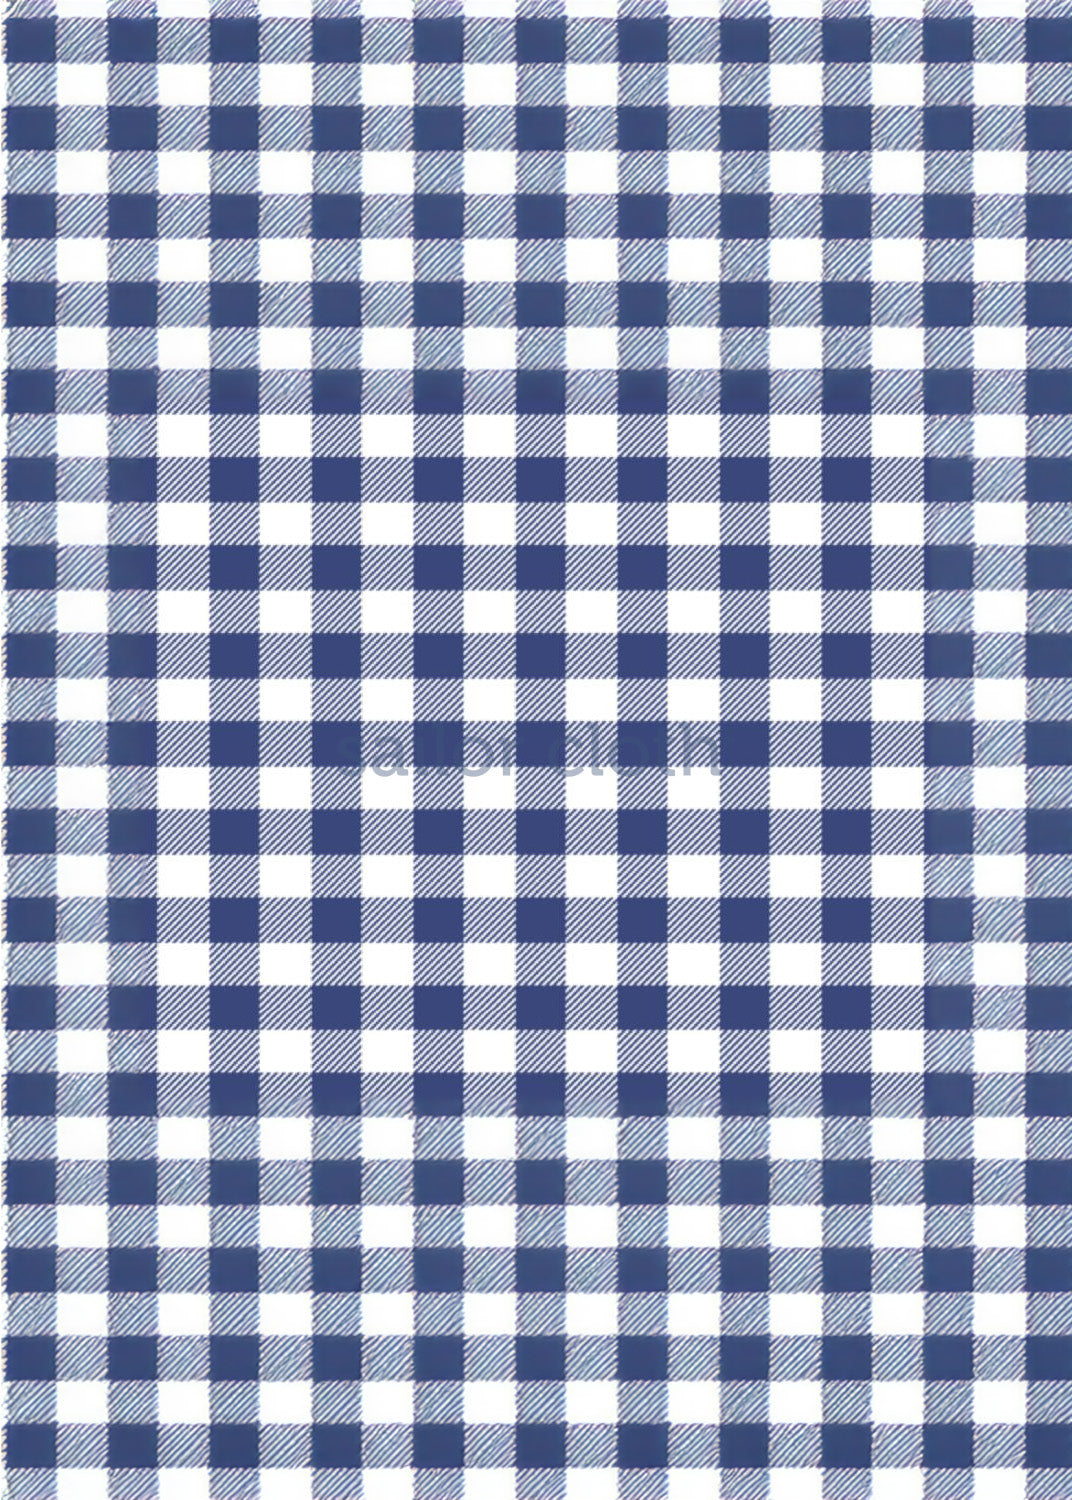 Country Club Skort - Gingham Navy/White with Ric Rac